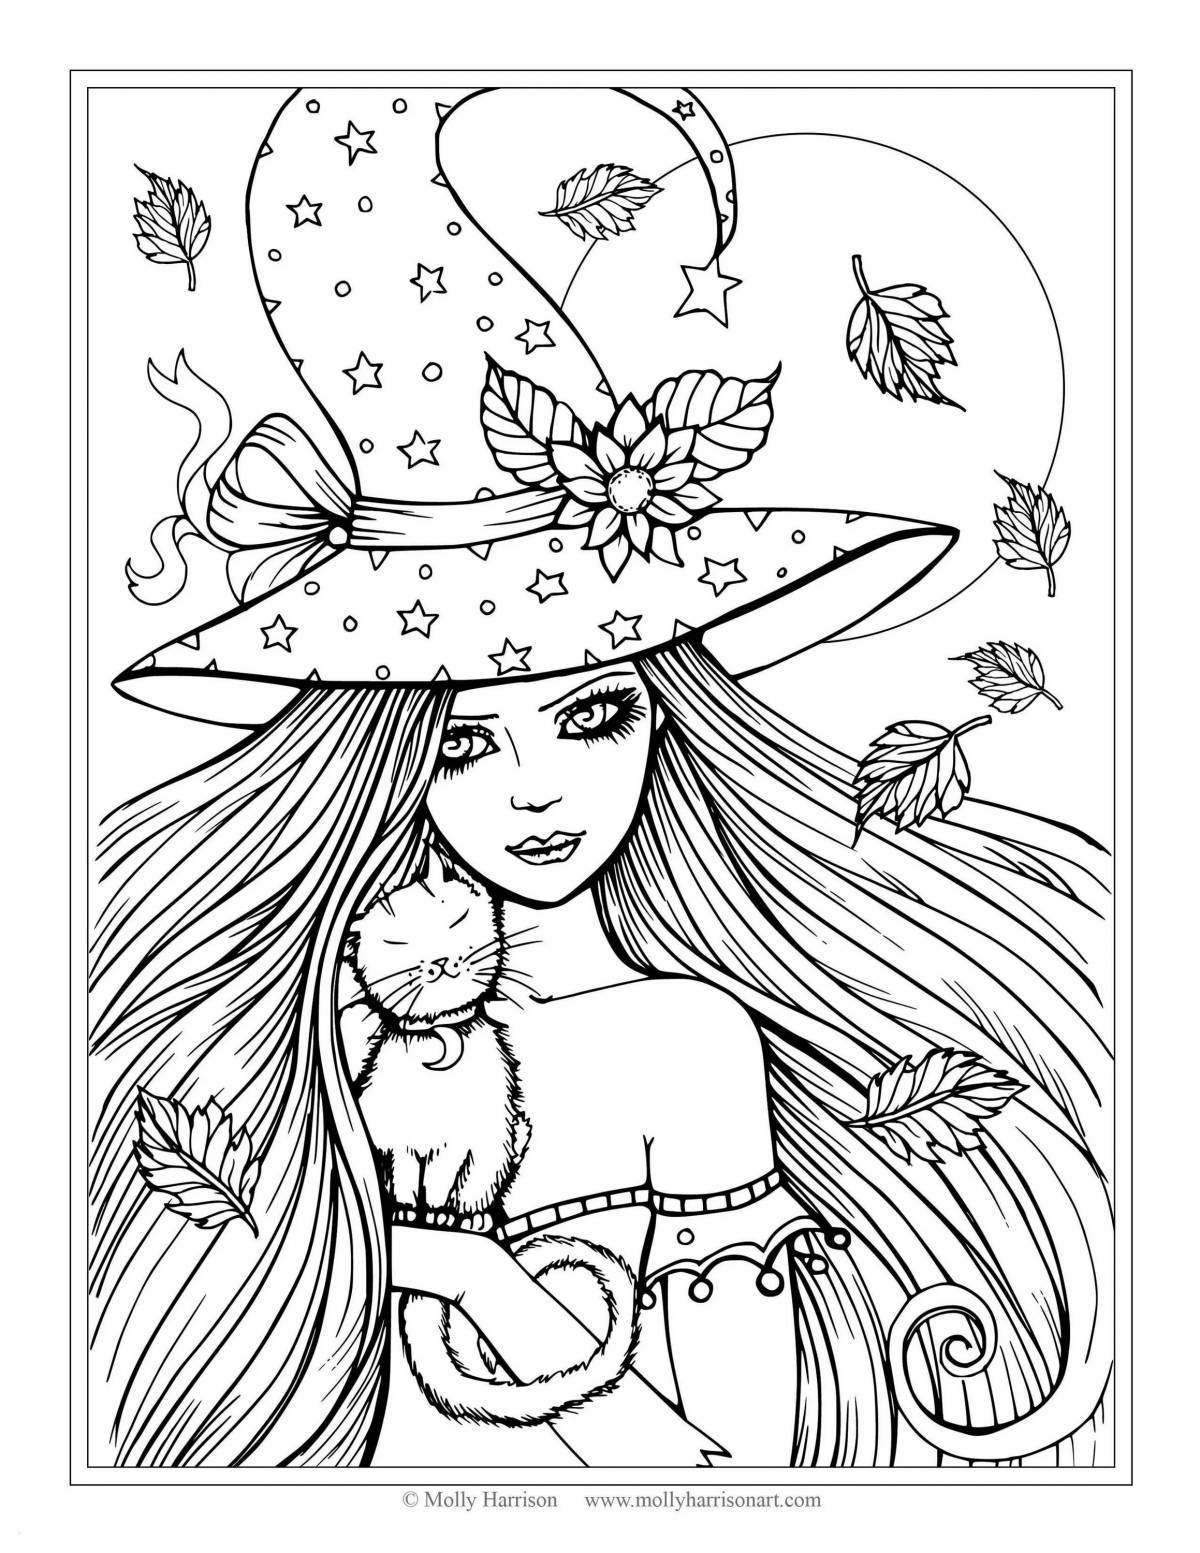 Delightful coloring 16 for girls